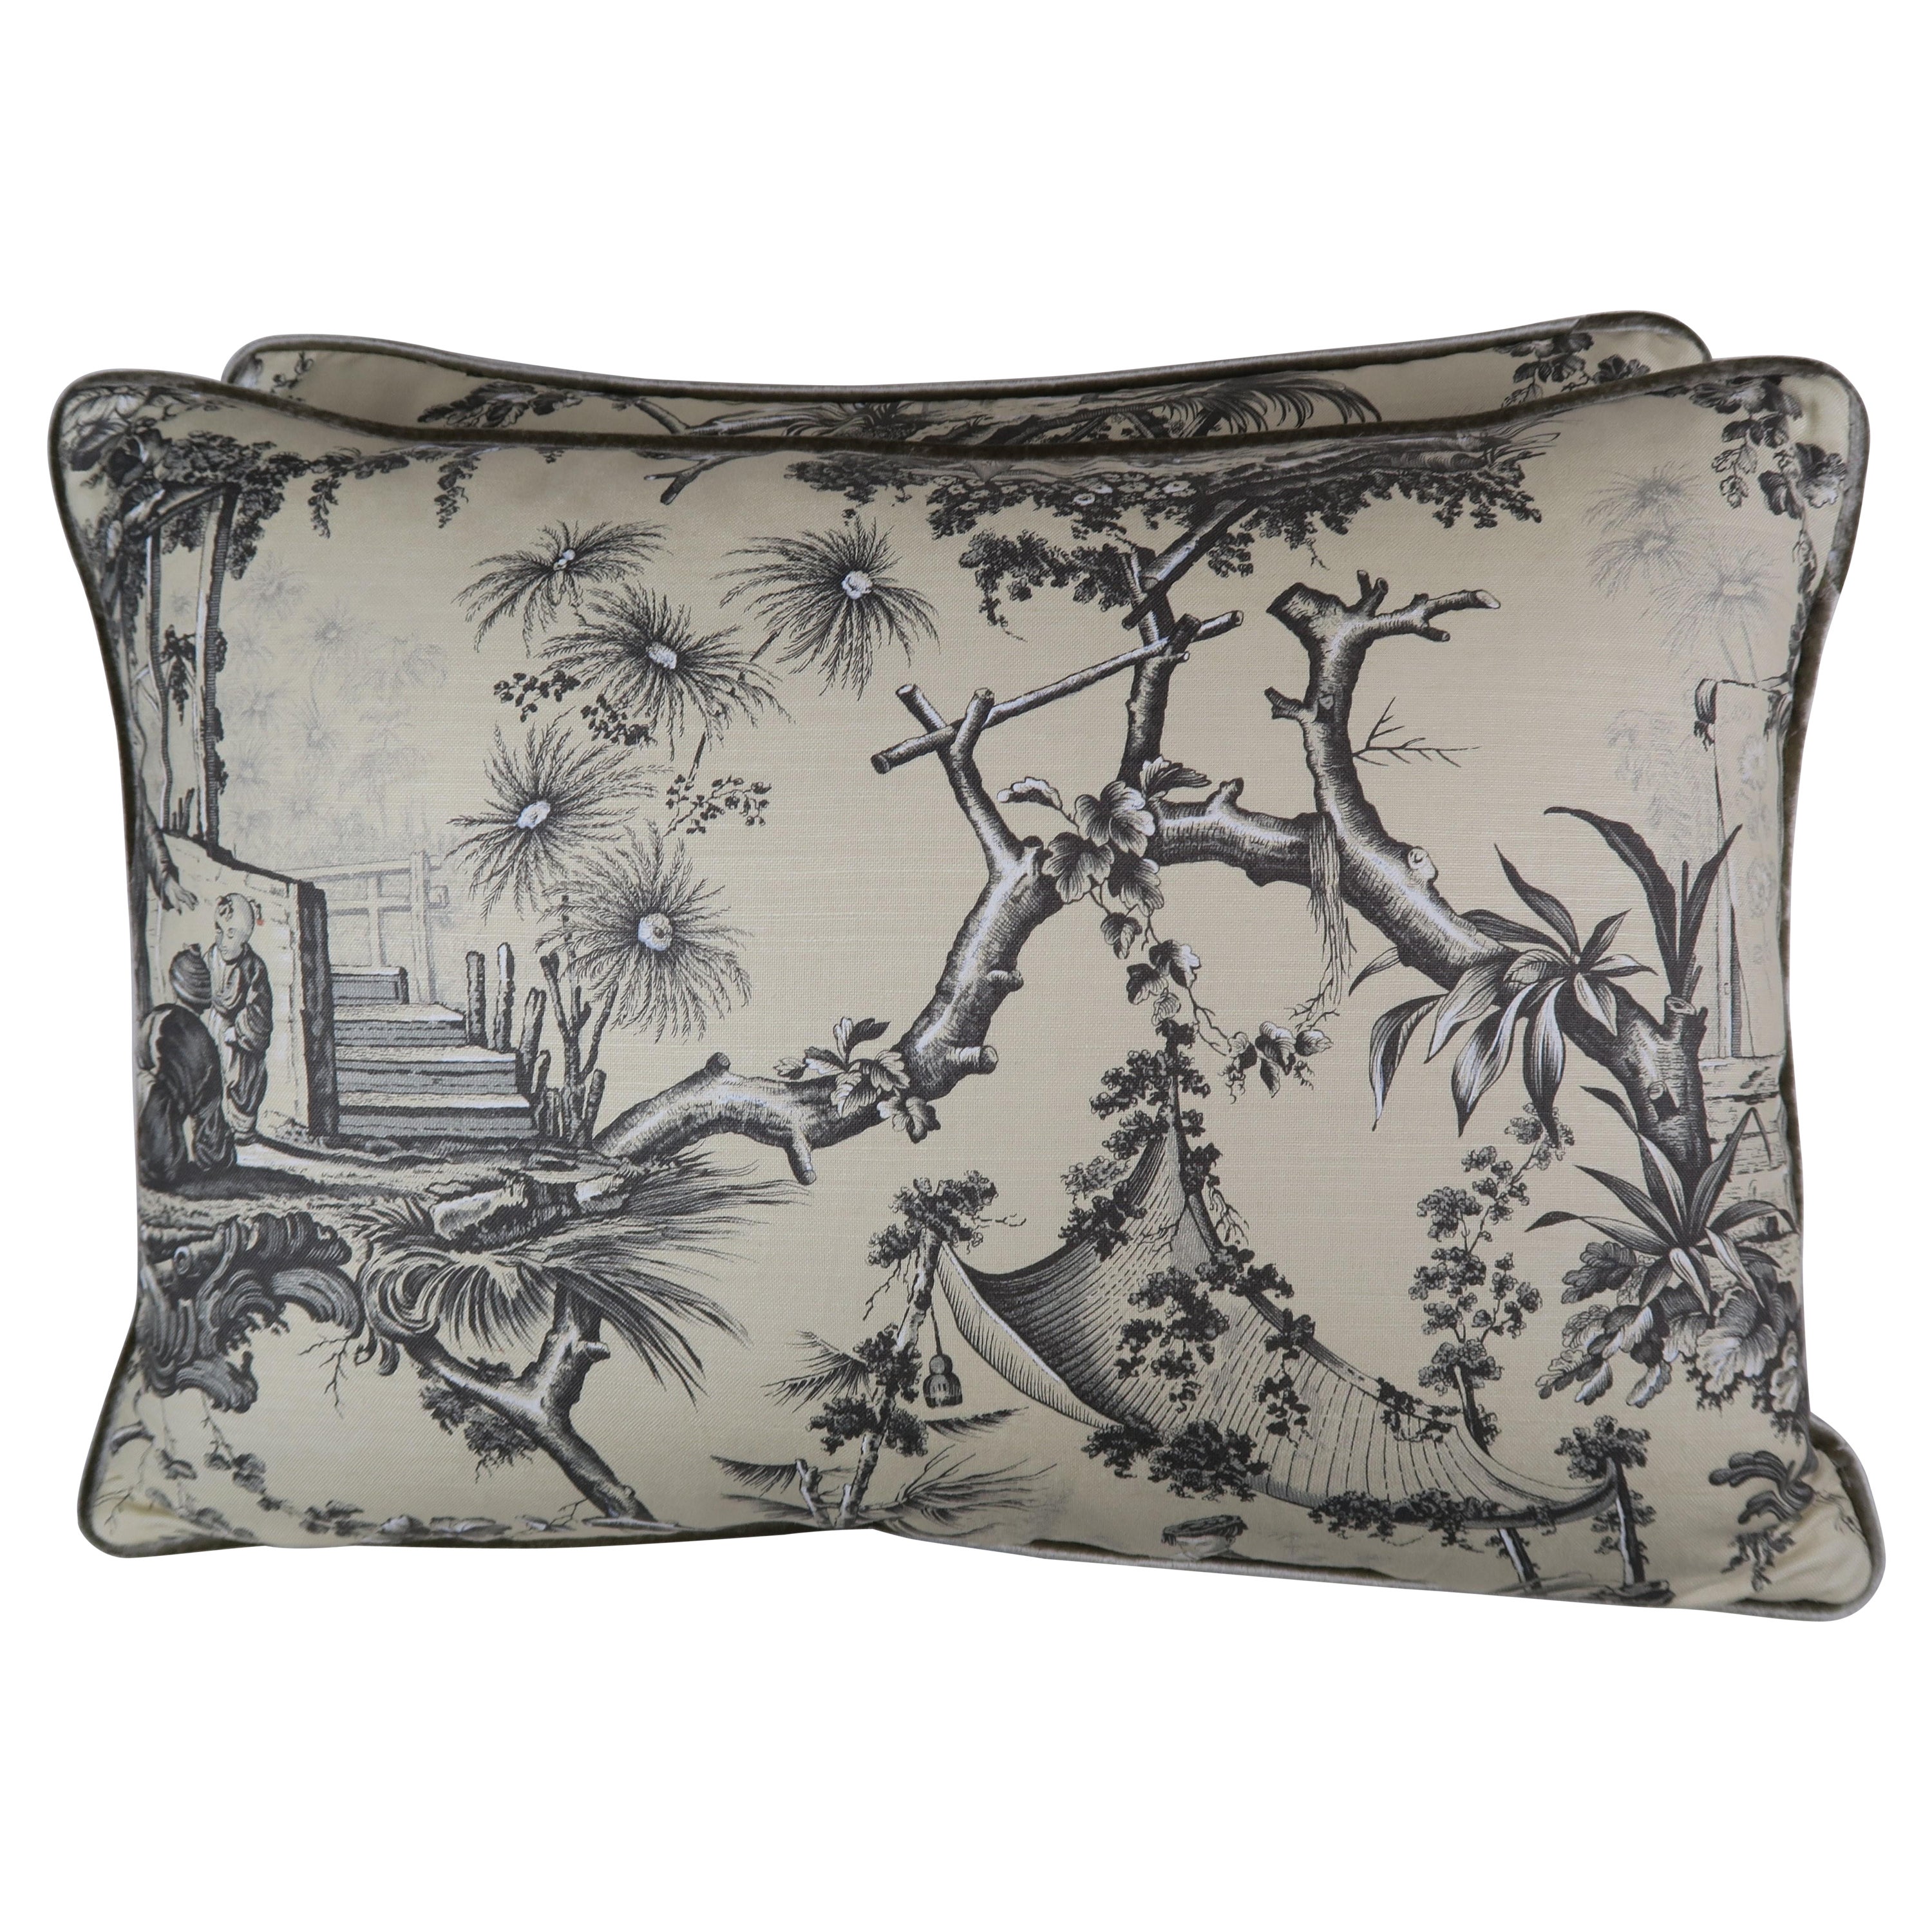 Pair of Chinoiserie Style Printed Pillows